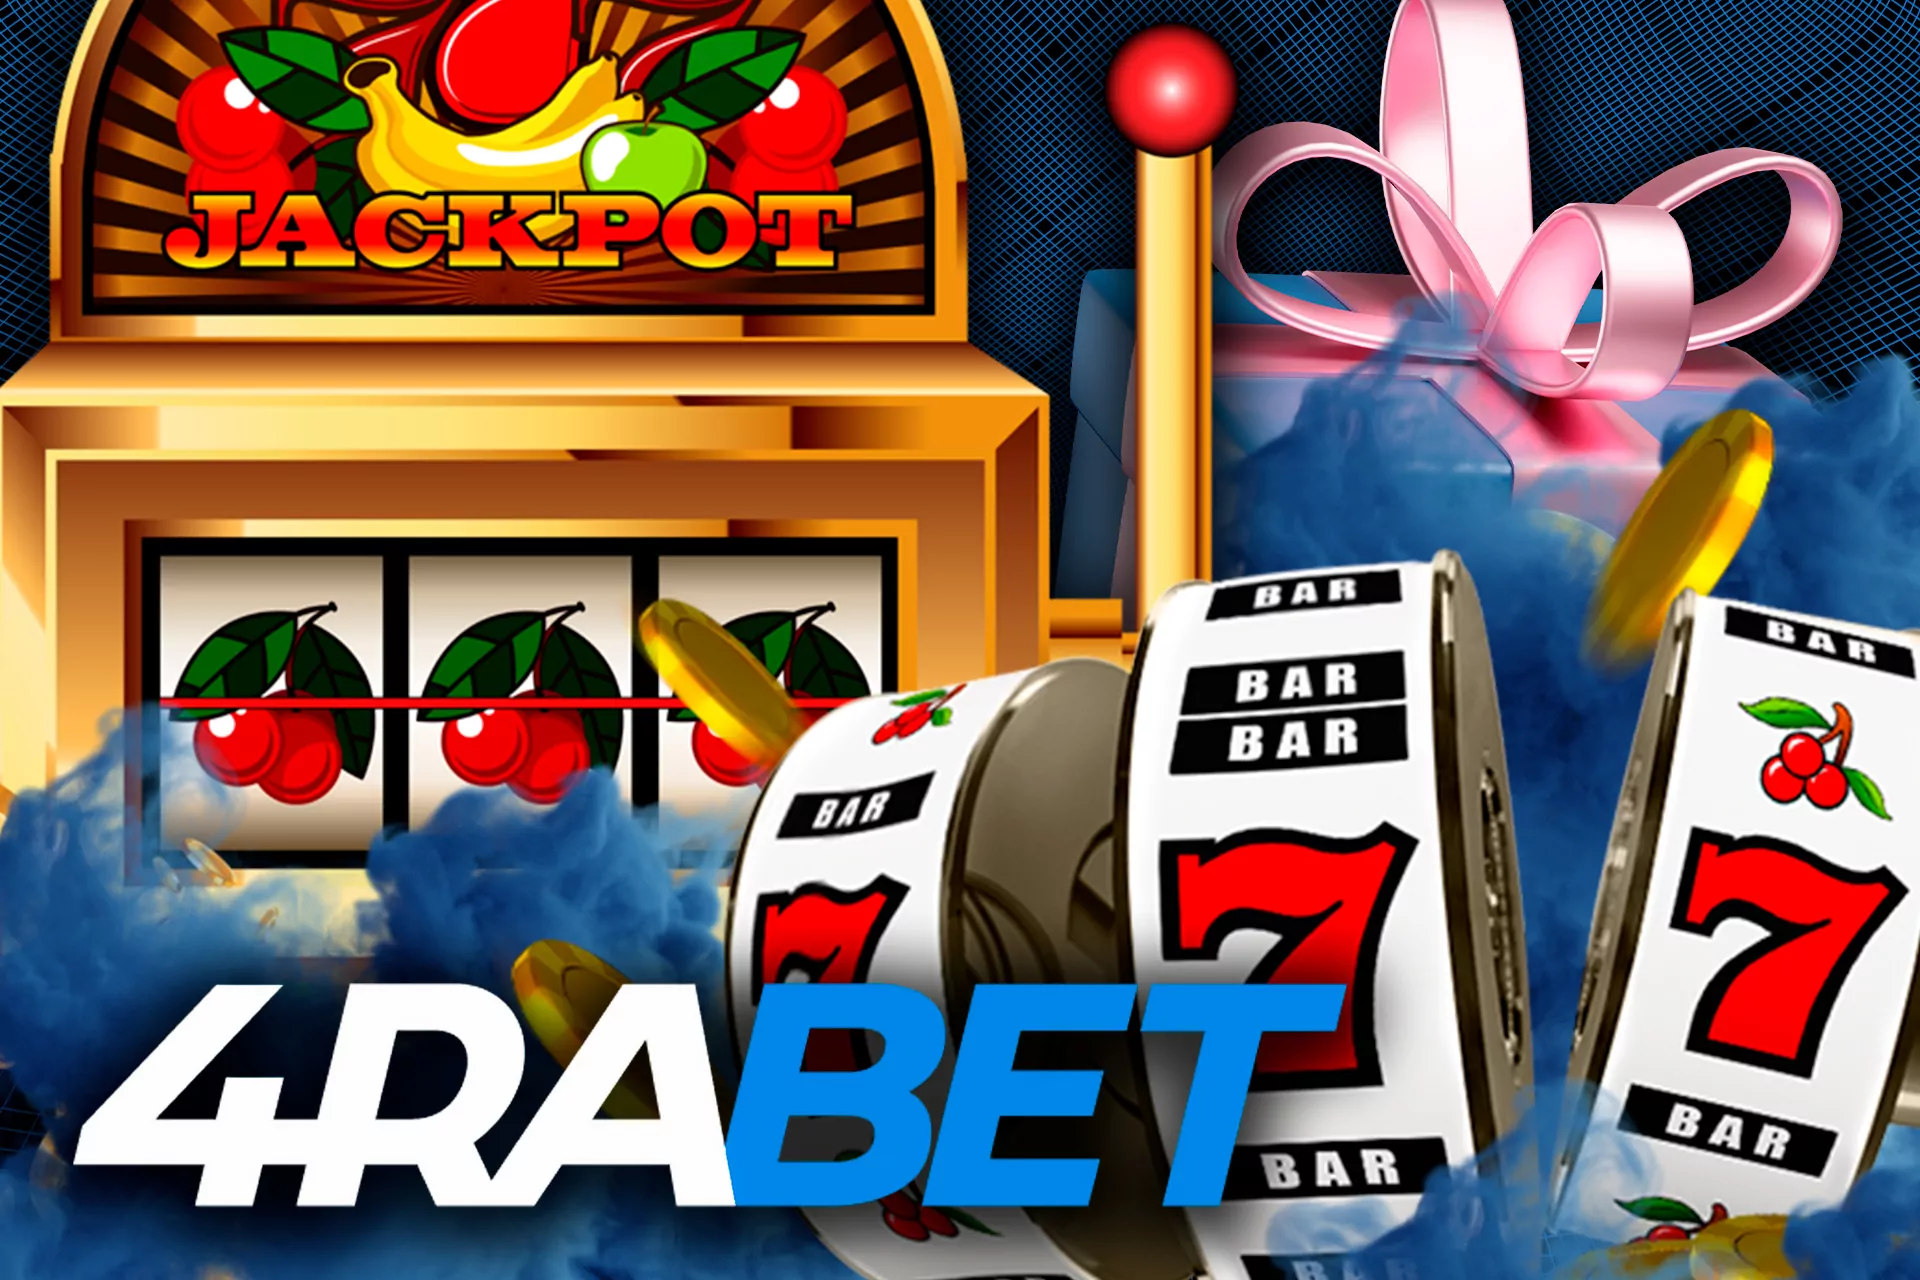 The Free Spins allow you to assess the interface and play some slots without making the first deposit.